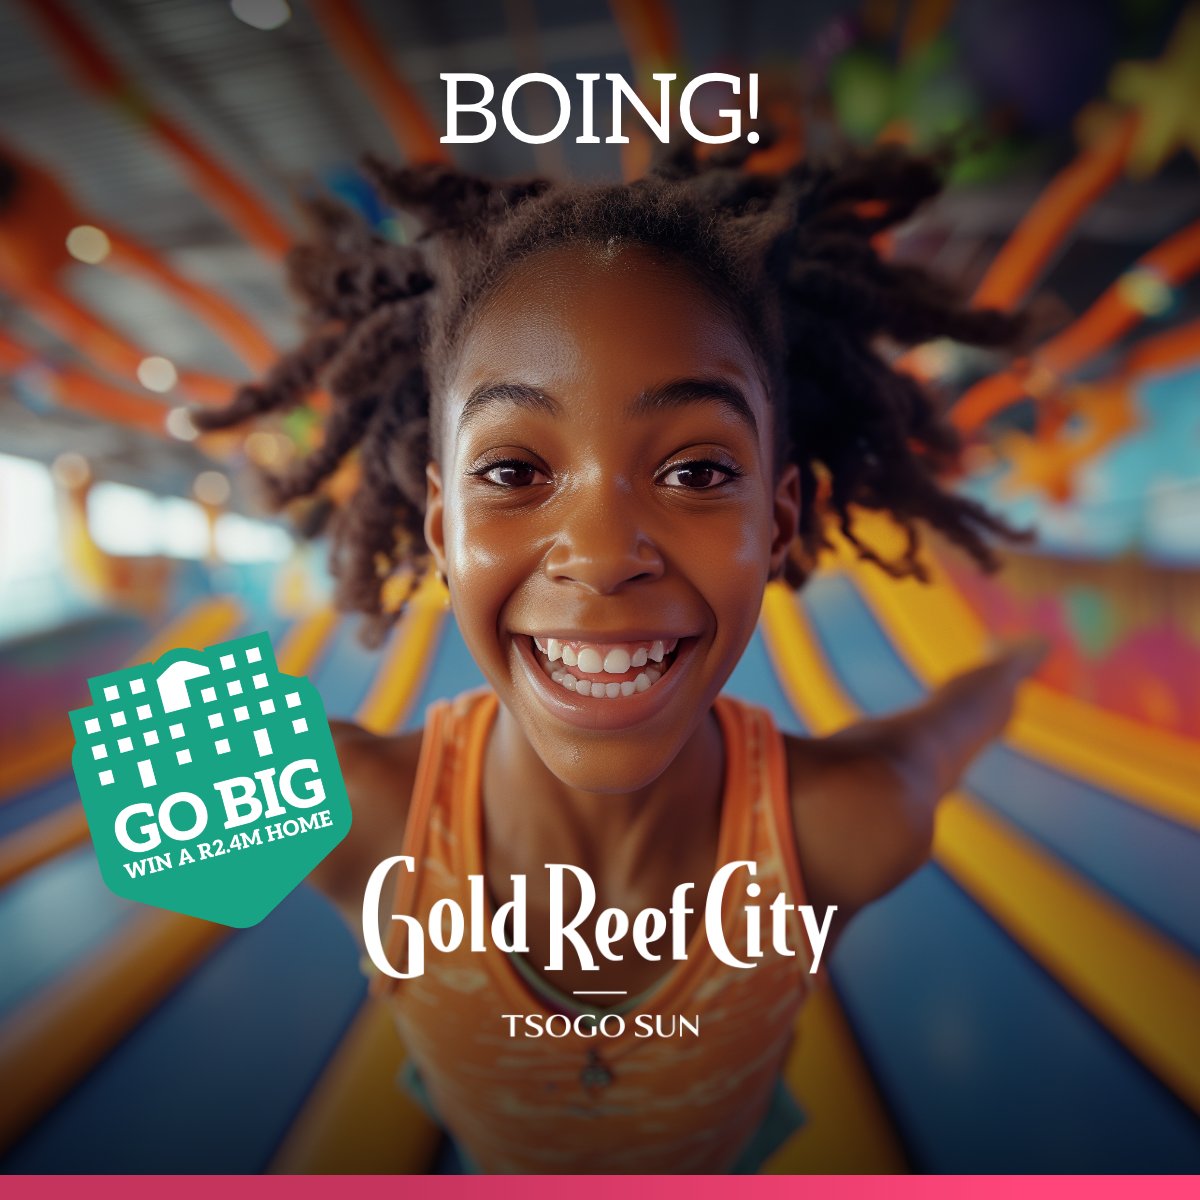 Jump right in and let’s have some fun on more than 21 trampolines. You could play dodgeball, practice your dunk, scale a wall and jump into a foam pit. Pay R250pp for Theme Park access and come to Jump City. bit.ly/3HiCXeM